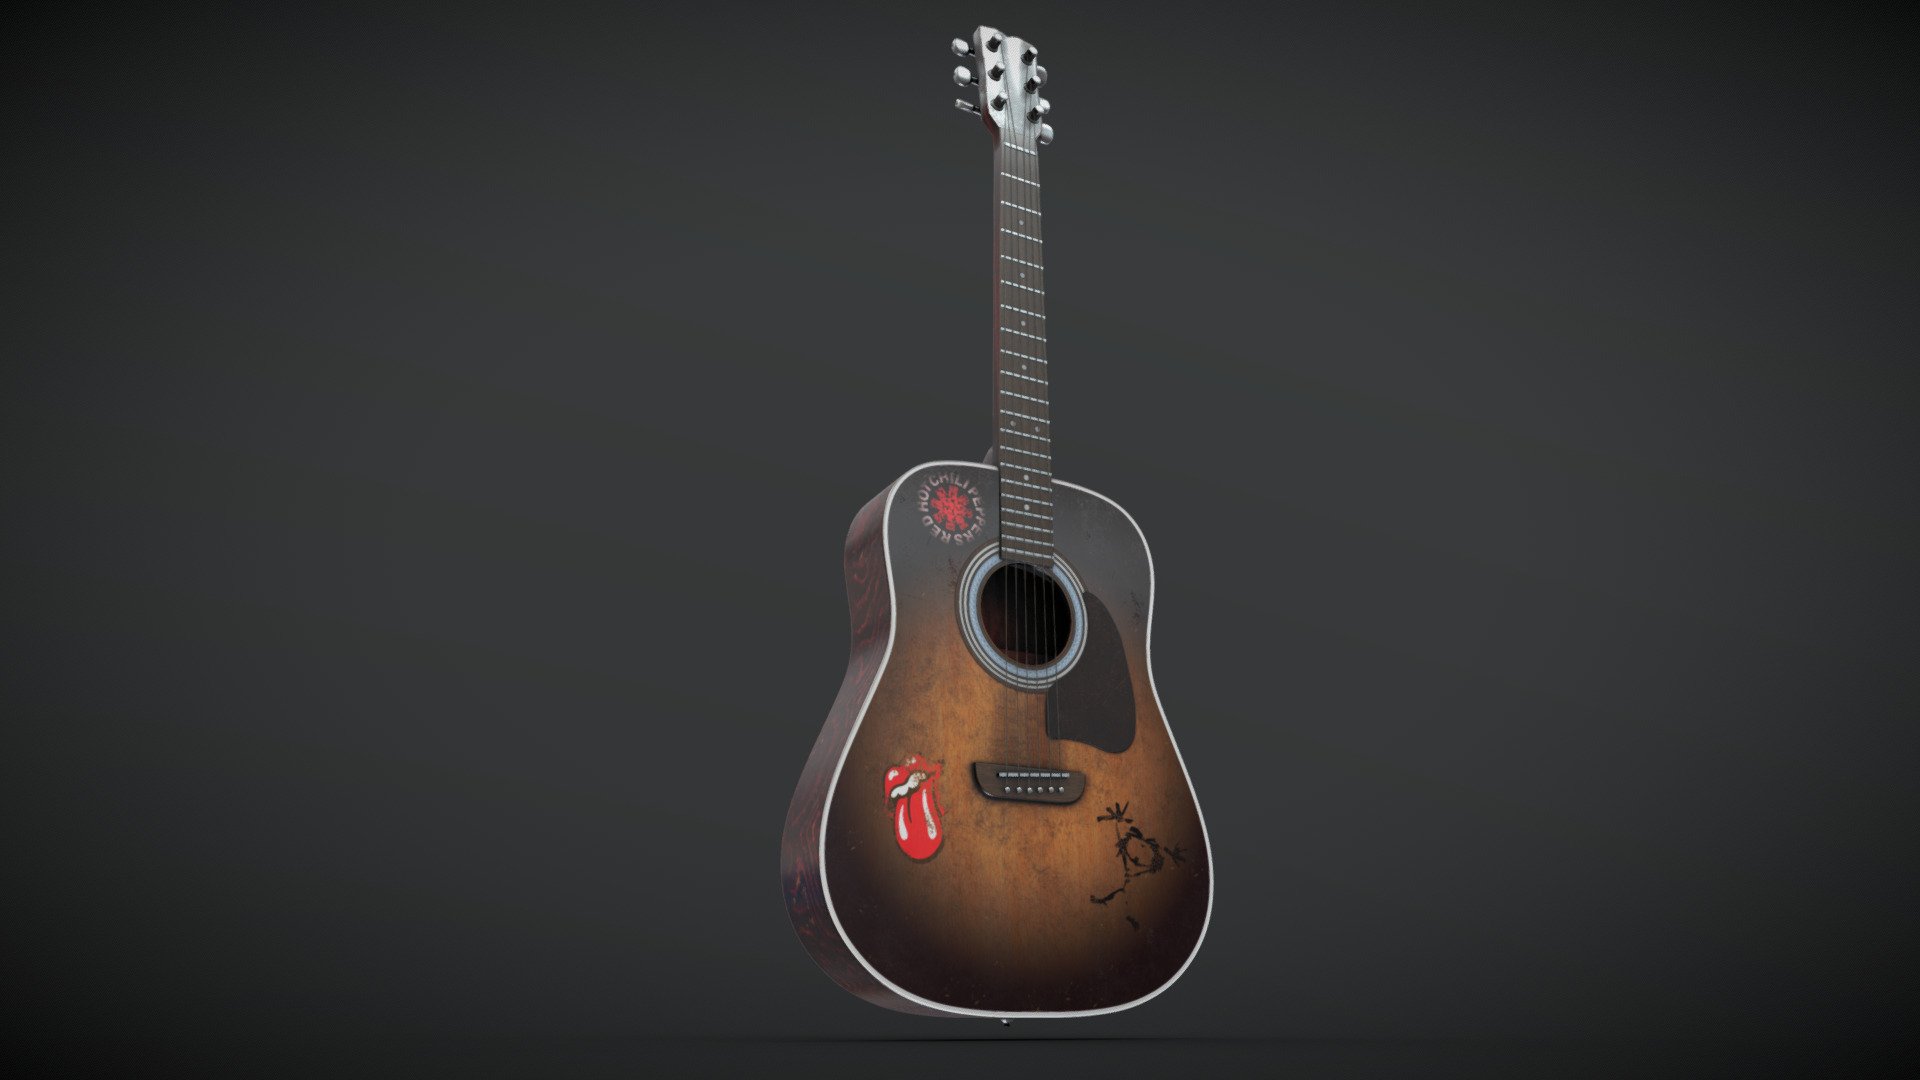 Used and old.. inspired in 90s Guitar..
2k textures Png blend file, fbx with embed textures and Unreal Pack folder textures - Acoustic Guitar 90s - Buy Royalty Free 3D model by Caxtor 3d model